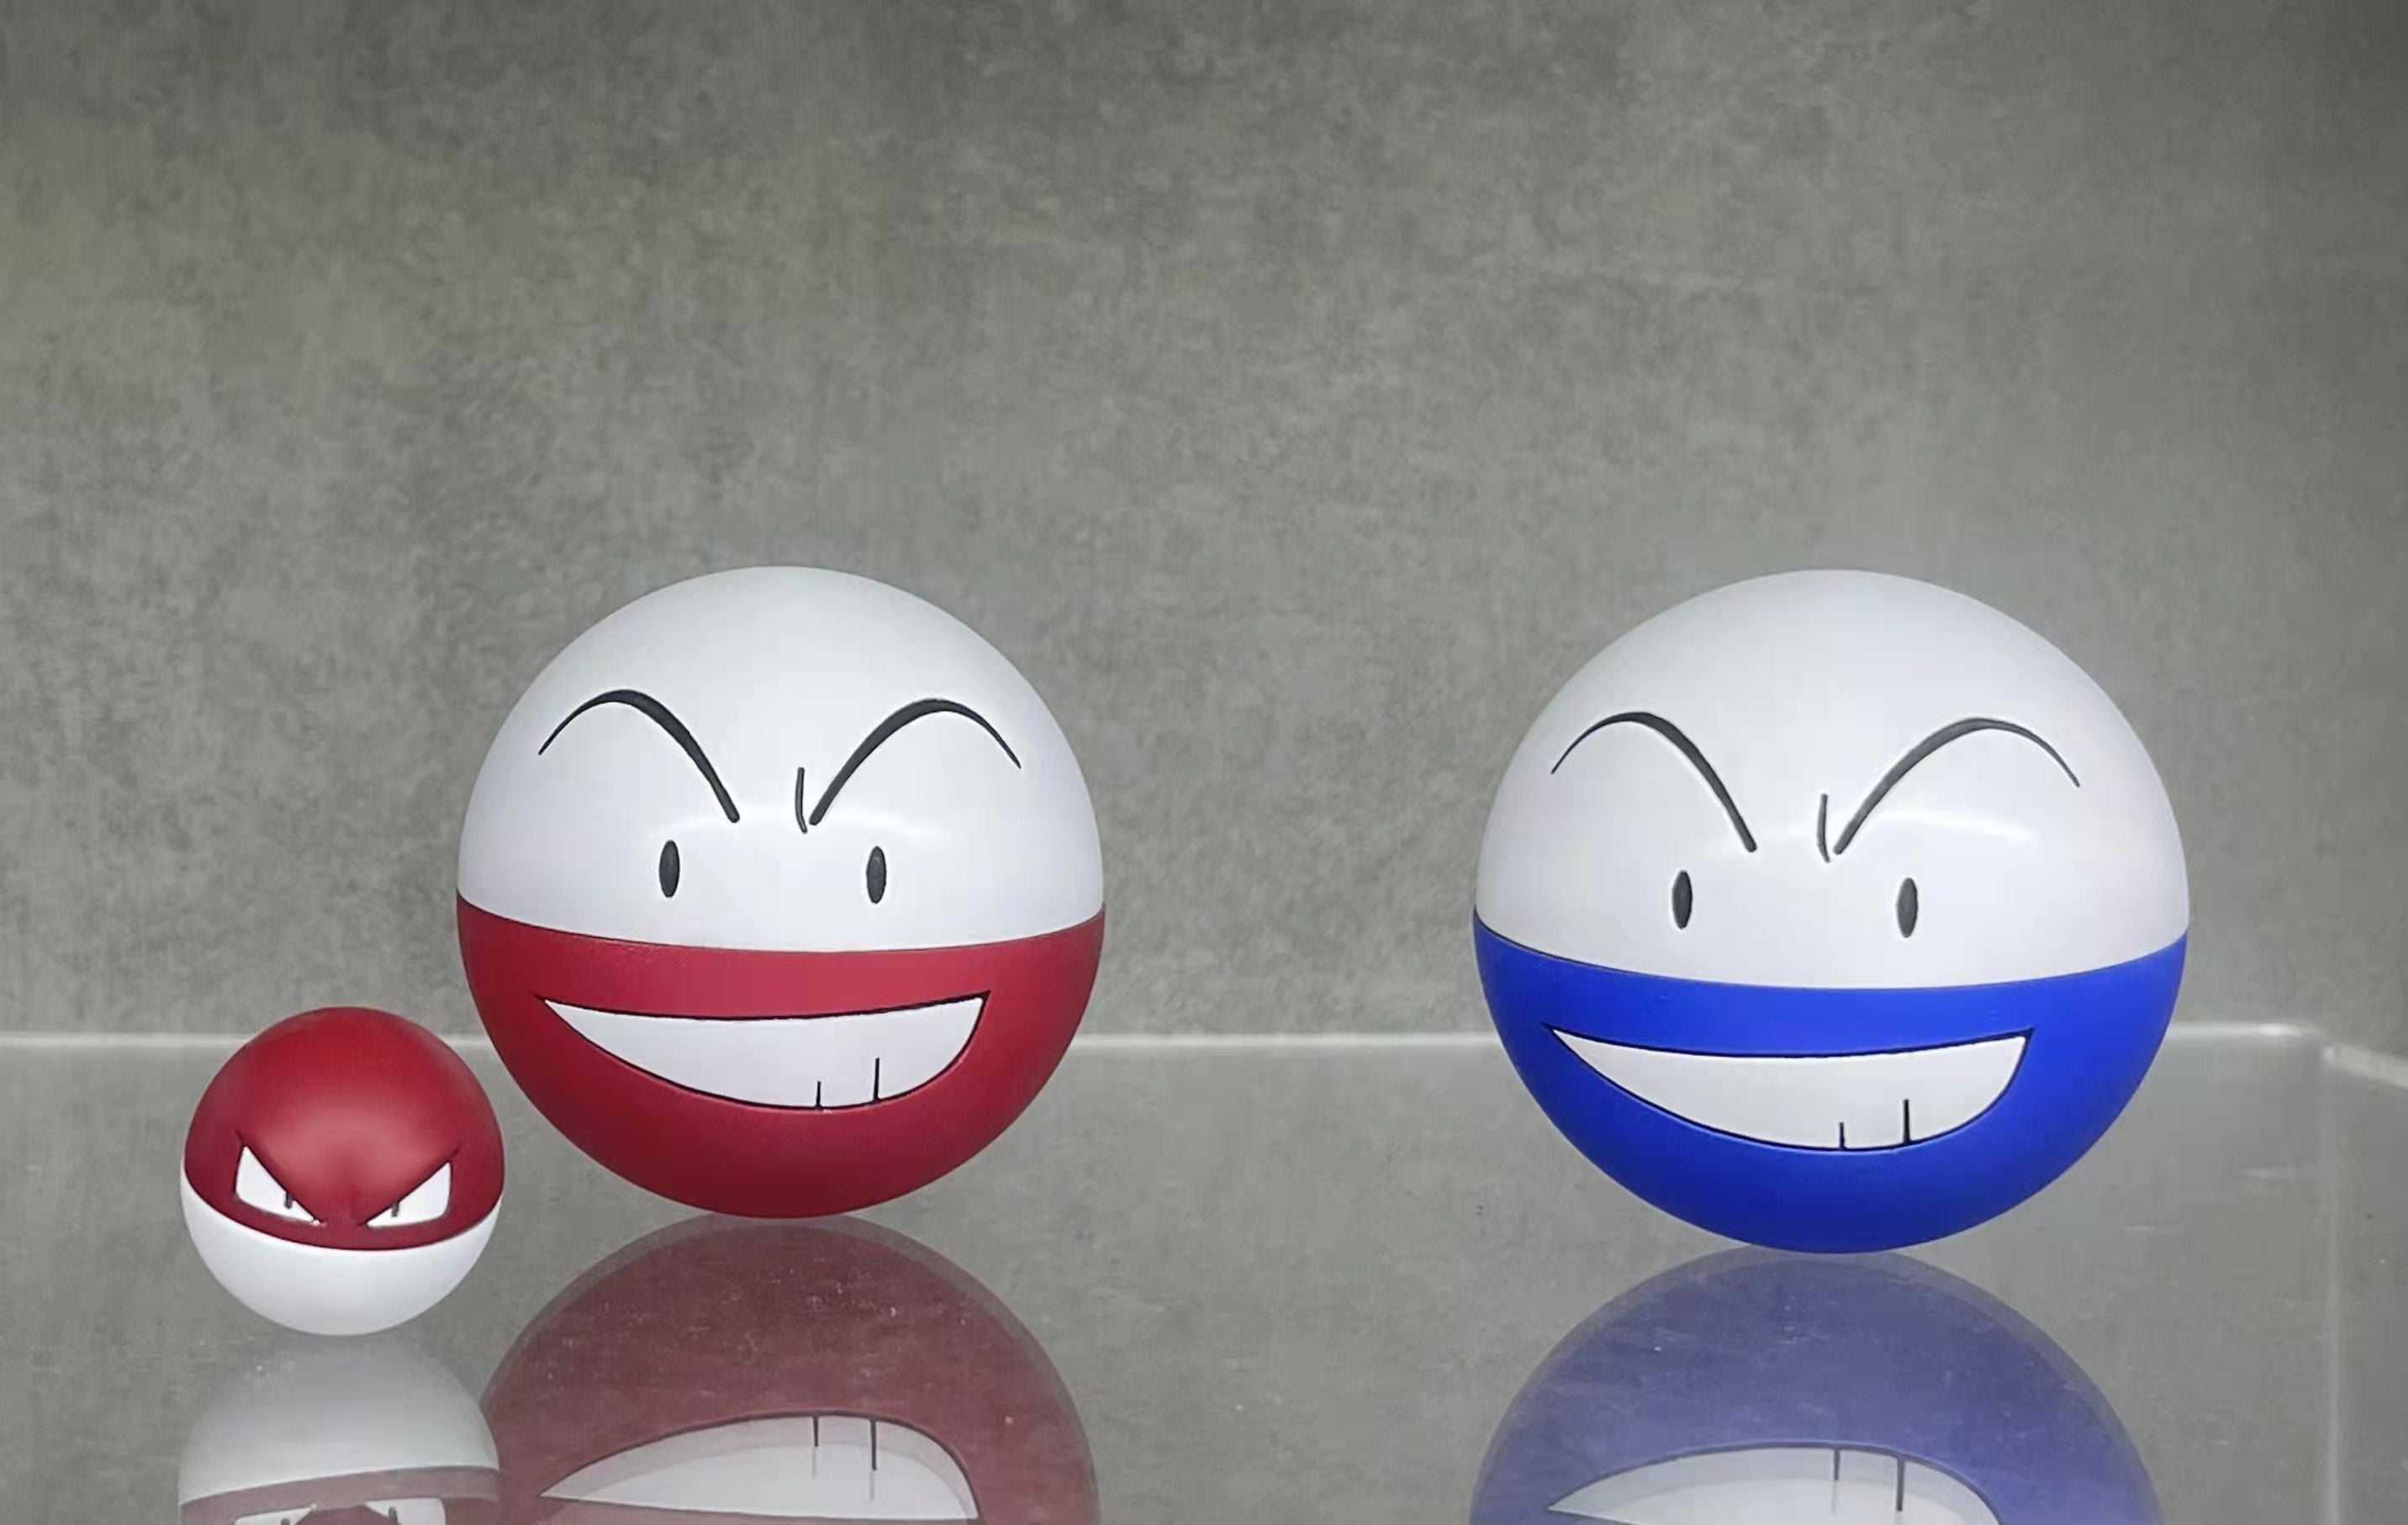 [IN STOCK] 1/20 Scale World Figure [KING] - Voltorb & Electrode